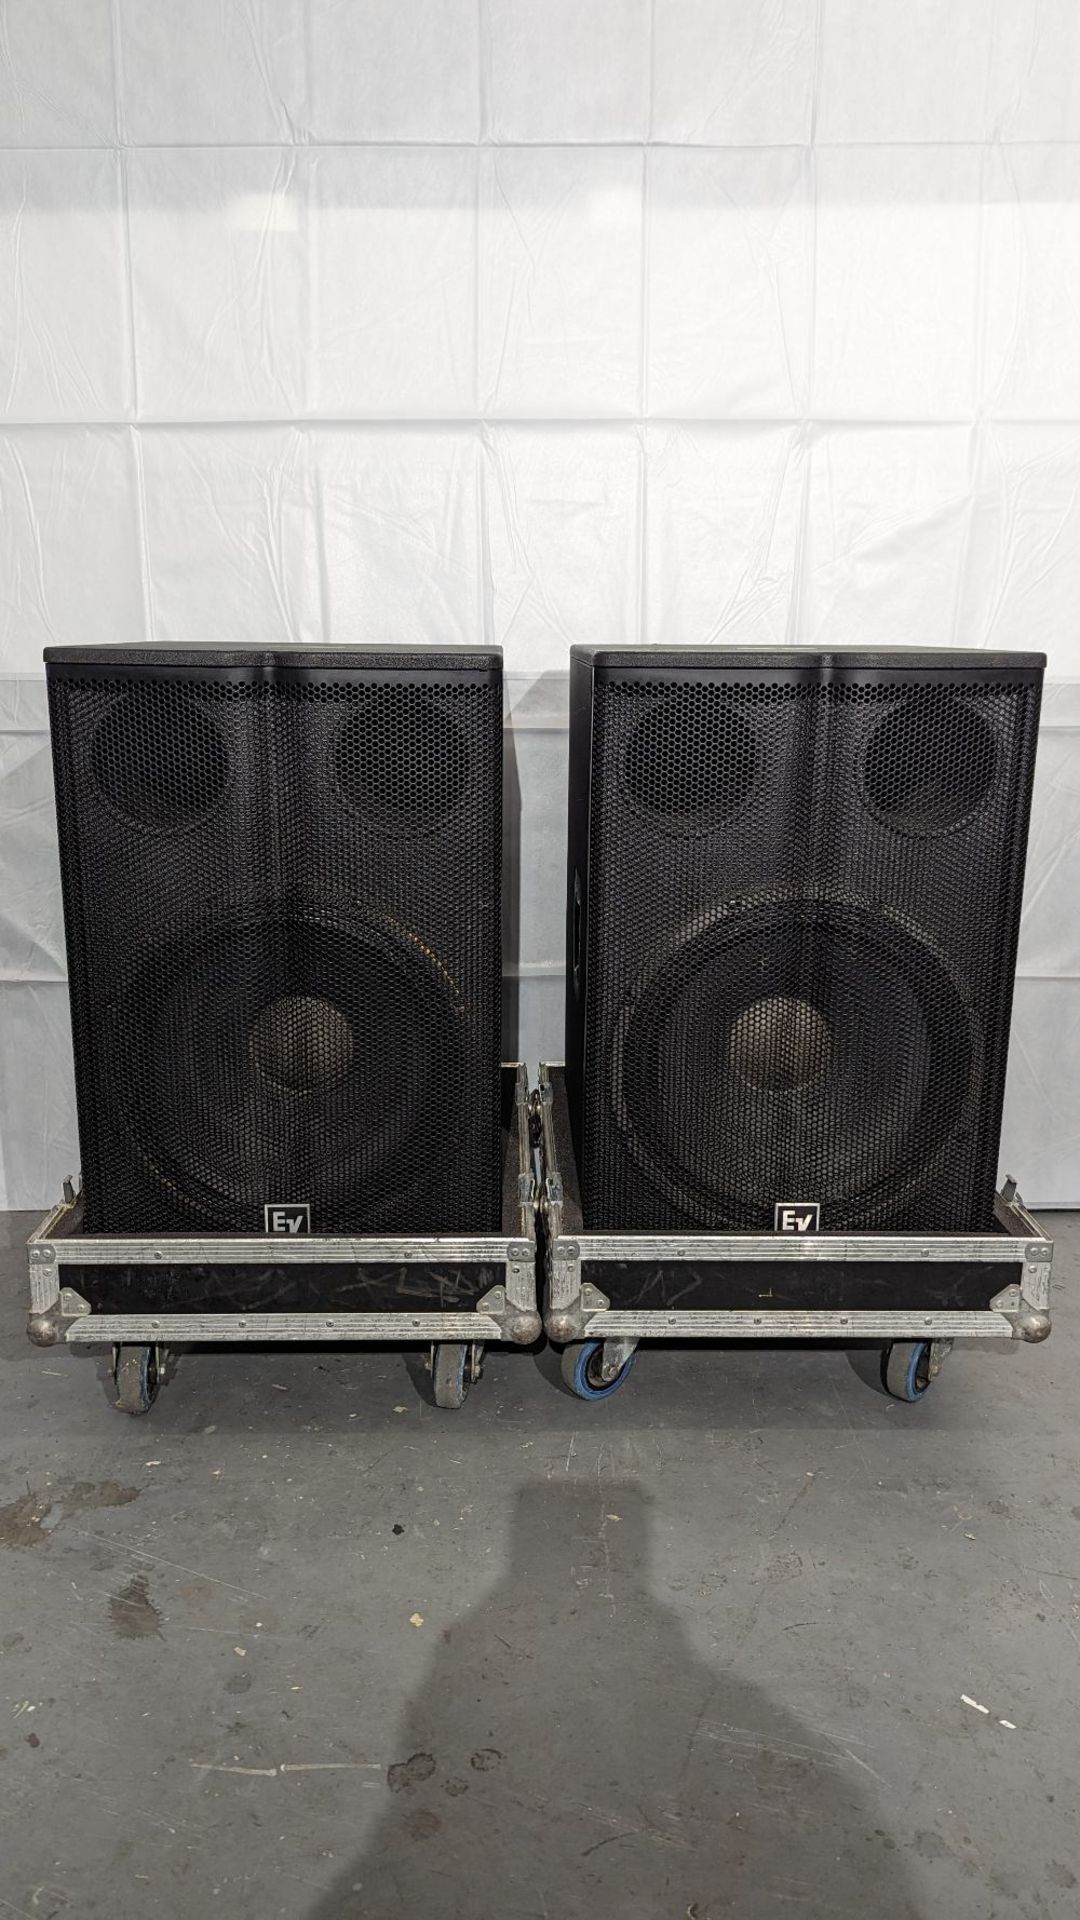 Electro-Voice PA Sound System - (4) TX1152 Speakers, (2) TX1181 Subs & Associated Equipment - Image 7 of 14